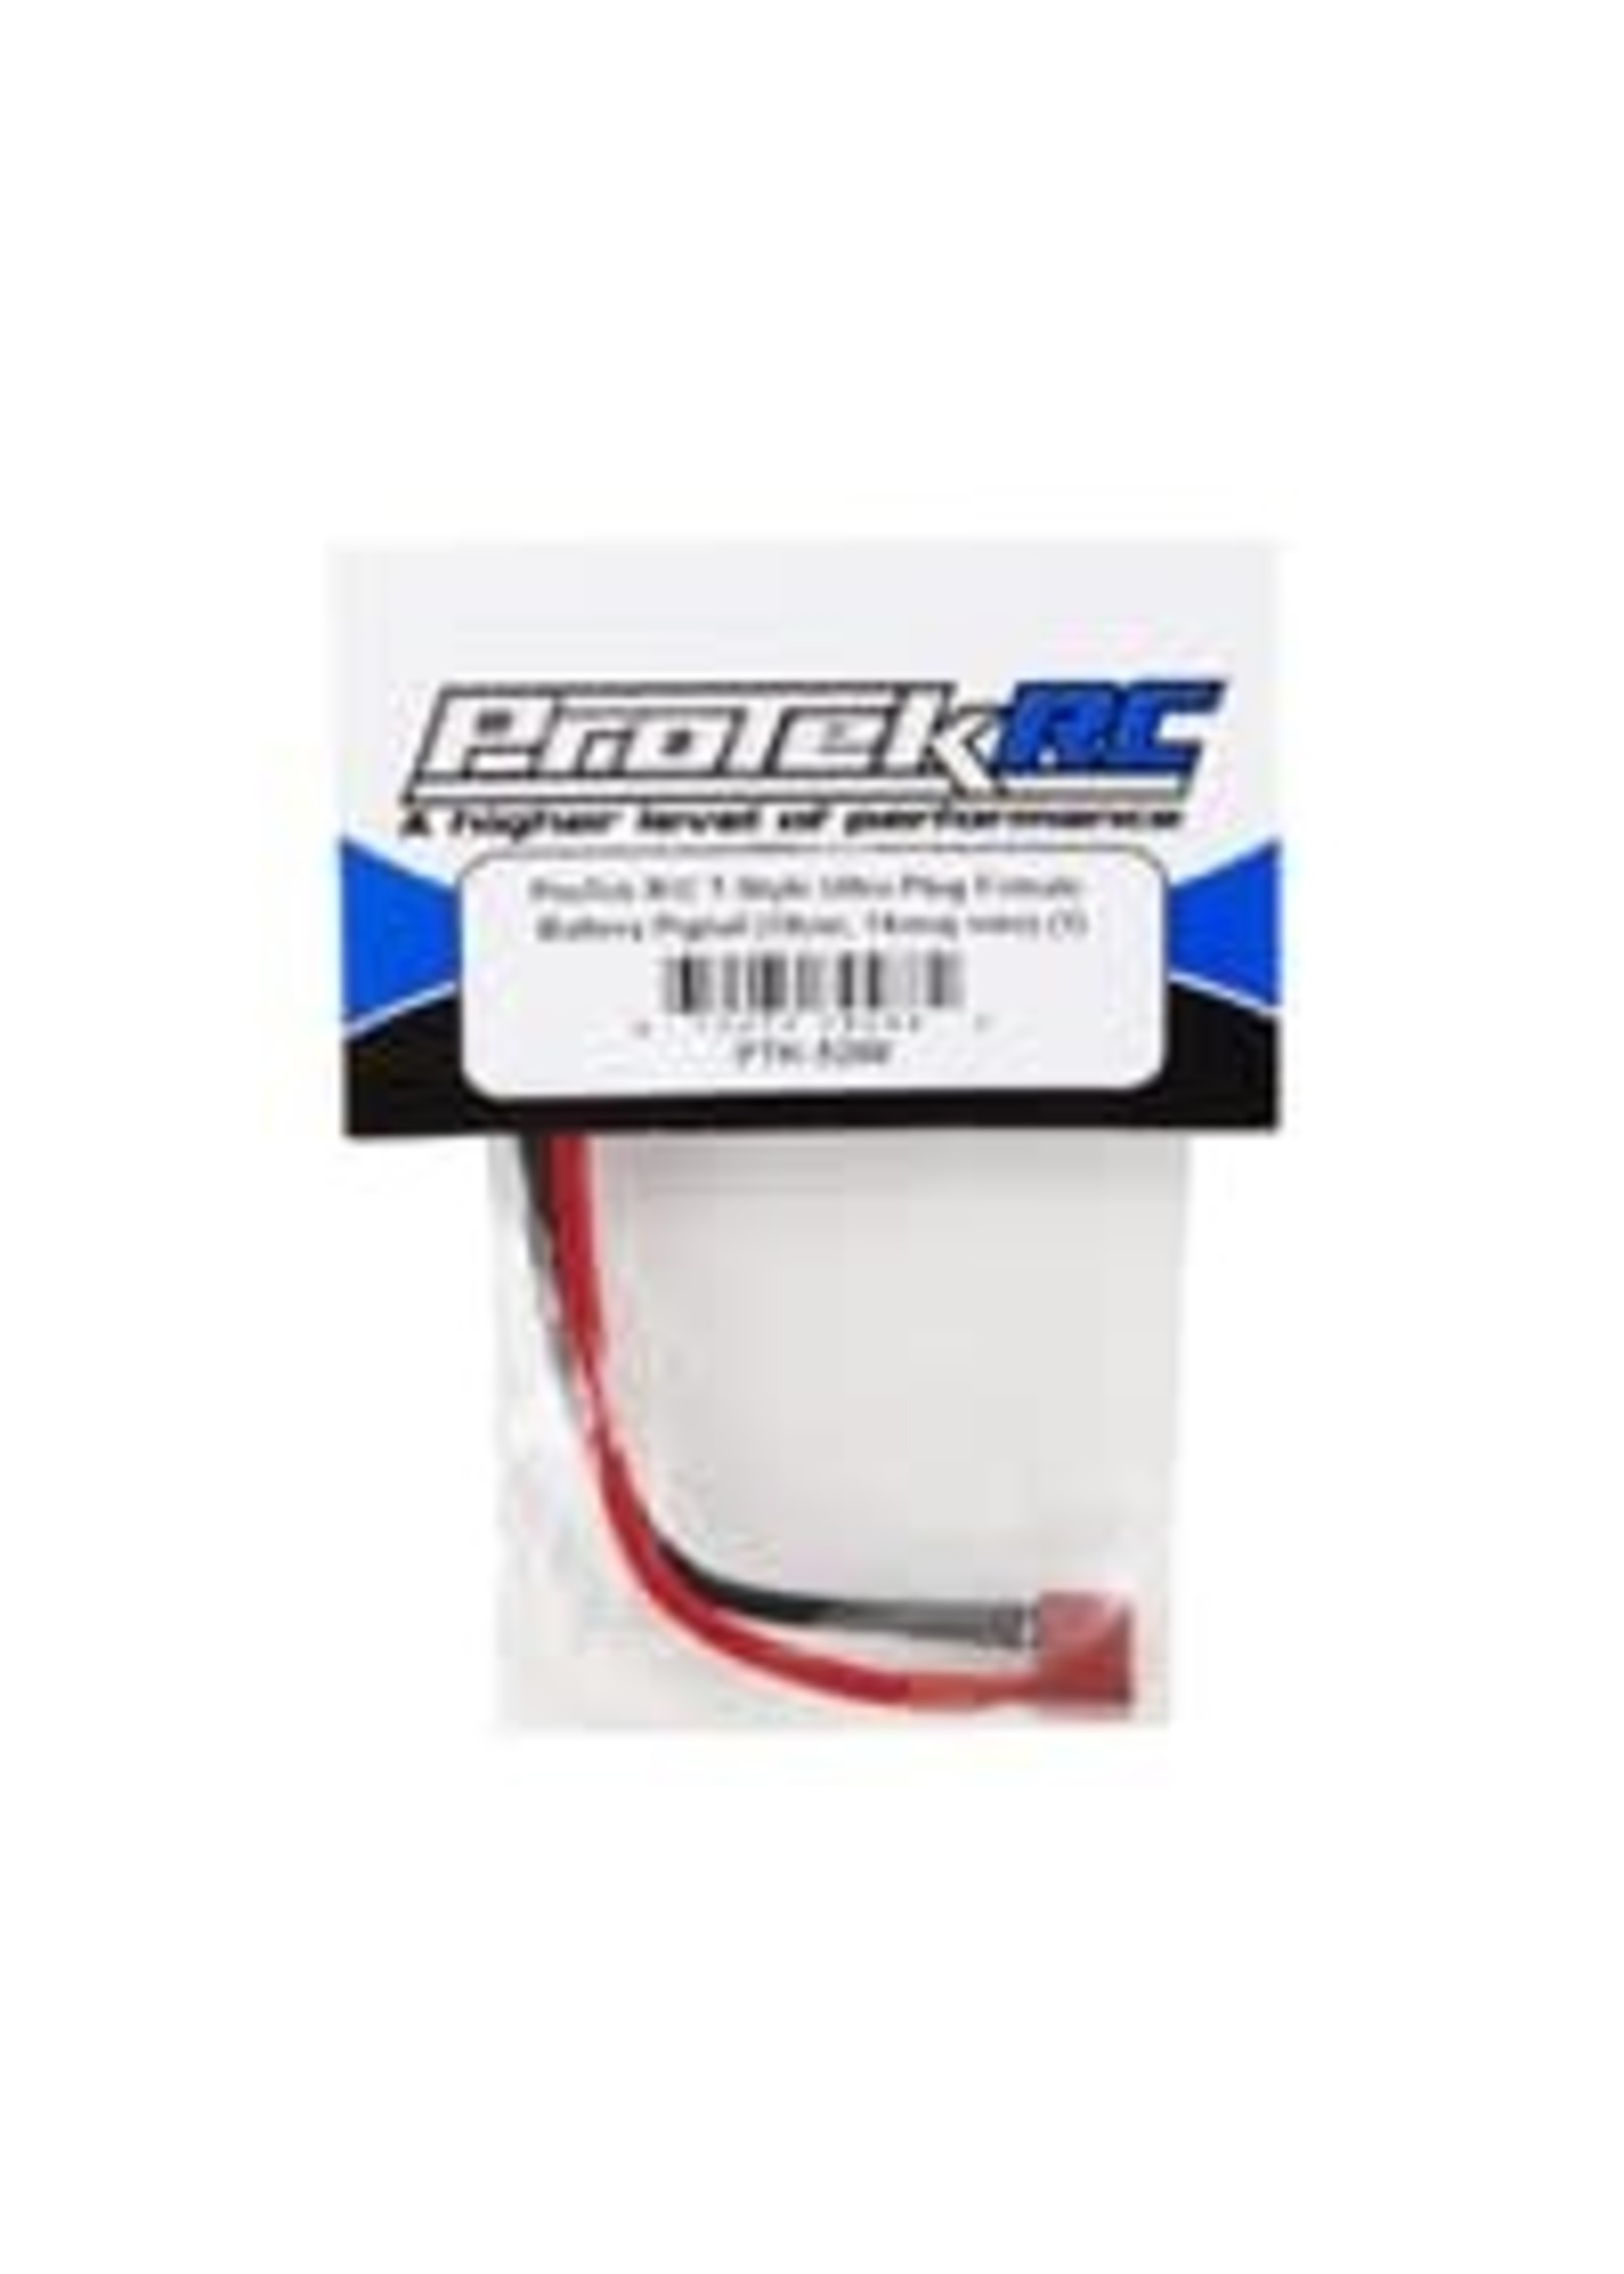 ProTek RC PTK-5200 ProTek RC T-Style Ultra Plug Female Battery Pigtail (10cm, 14awg wire) (1)